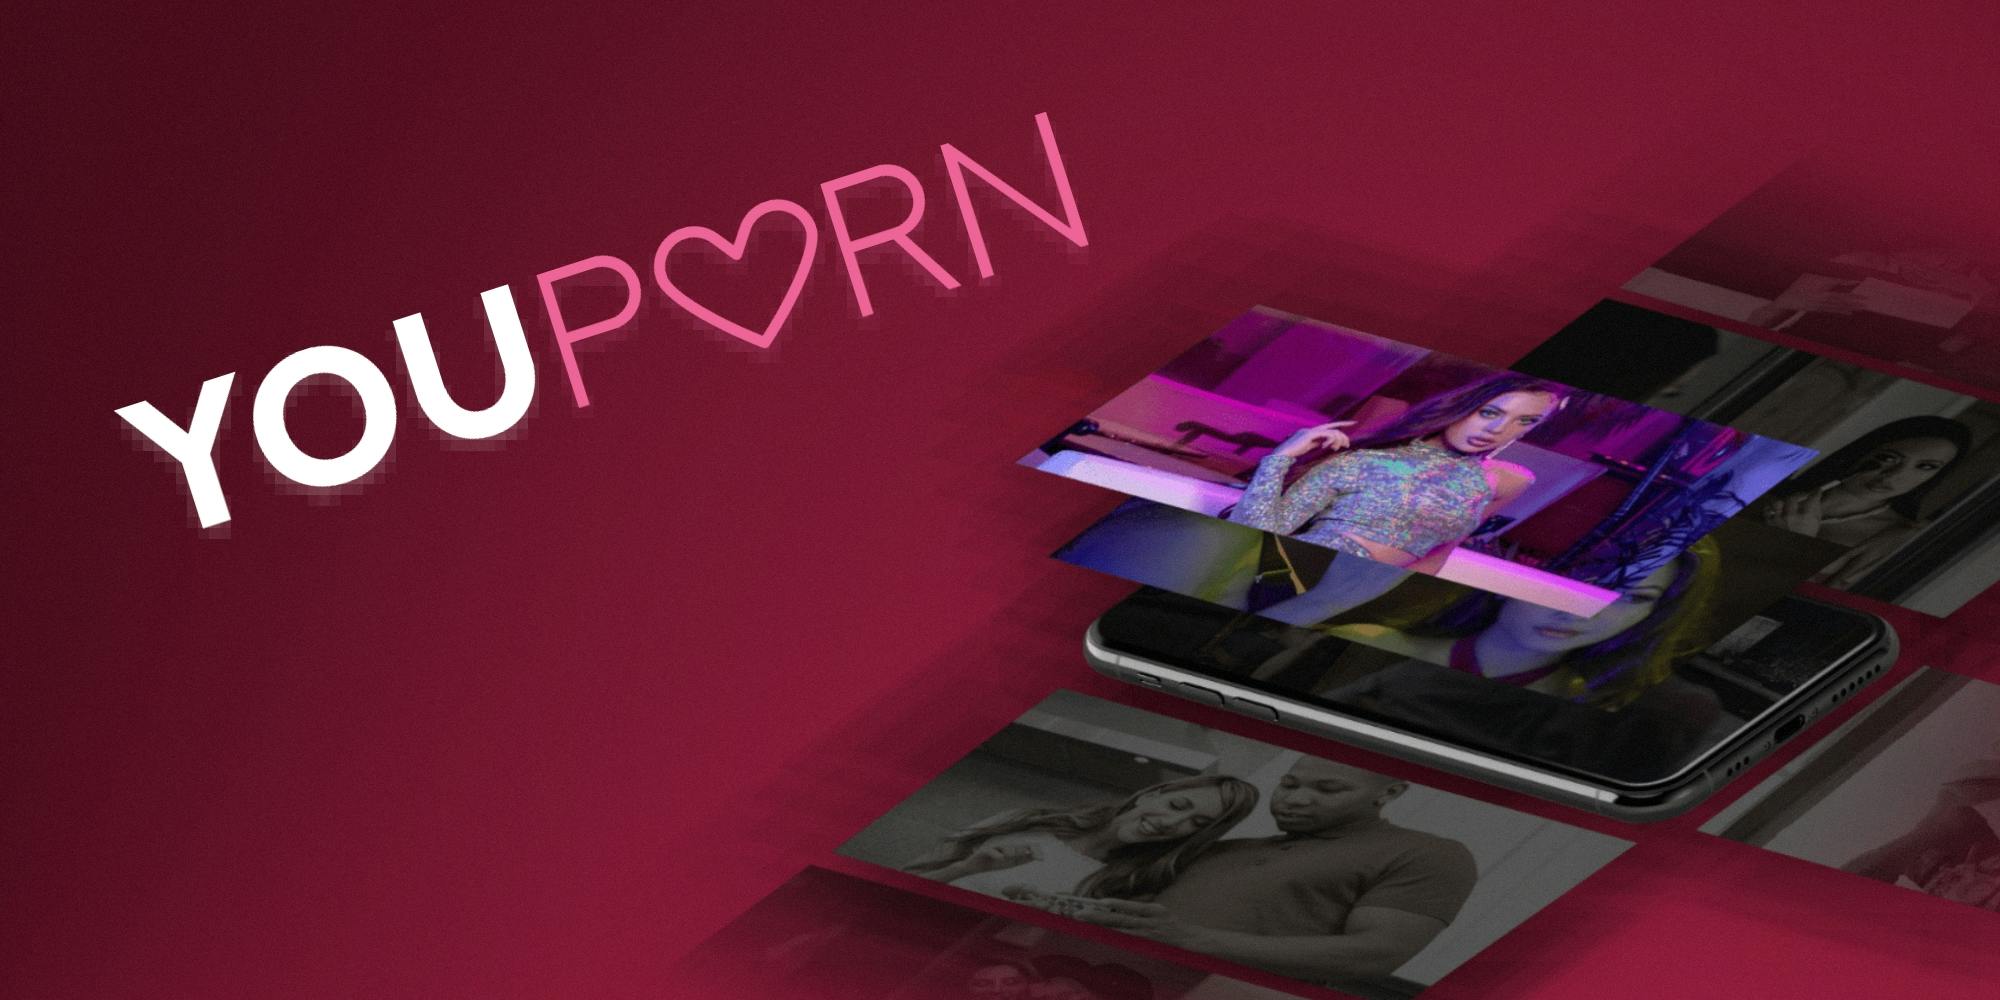 YouPorn launches adult-themed TikTok knock-off (updated)